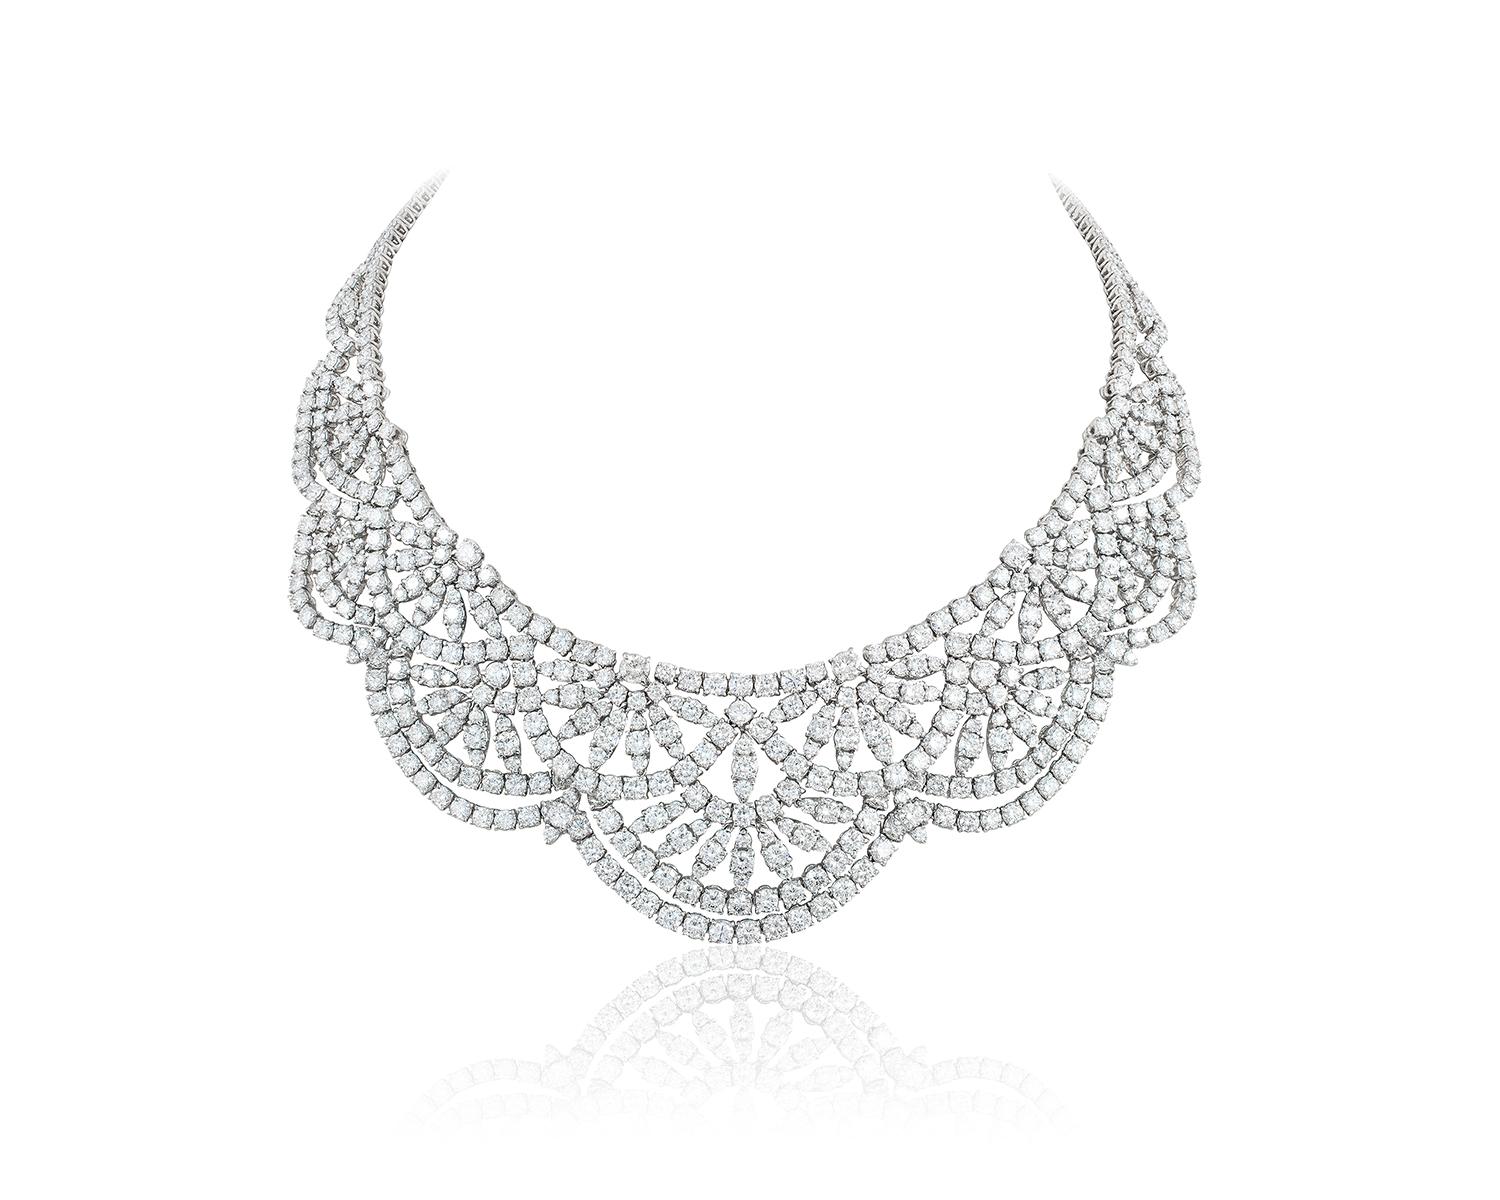 Andreoli Diamond Statement Necklace 18 Karat White Gold. This necklace features 53.48 carats of F-G-H Color, VS-SI Clarity full round brilliant cut diamonds. Set in 125 grams of 18 Karat white gold. This piece was created to the finest detail to